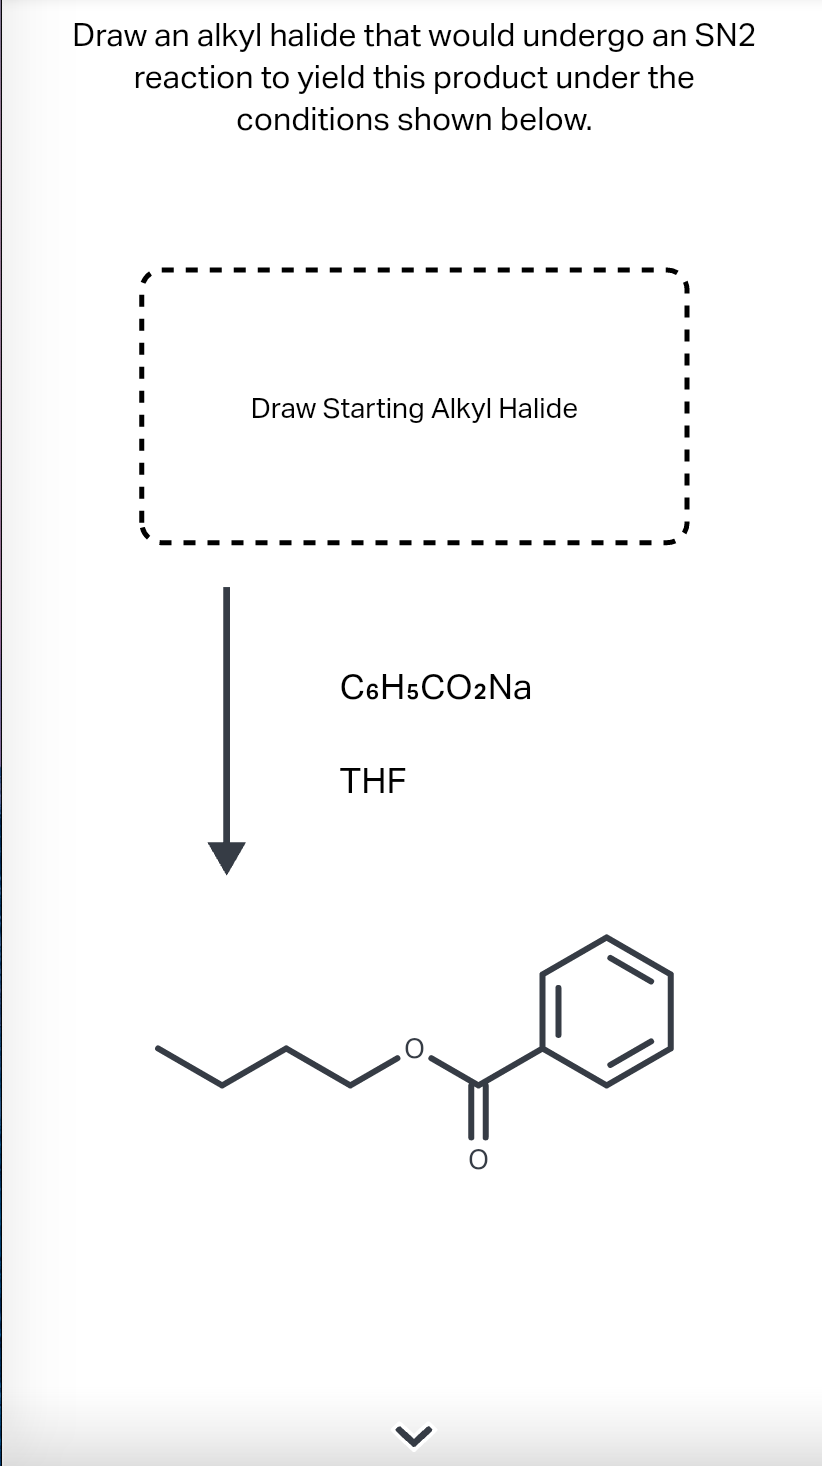 Draw an alkyl halide that would undergo an SN2
reaction to yield this product under the
conditions shown below.
Draw Starting Alkyl Halide
C6H5CO2Na
THE